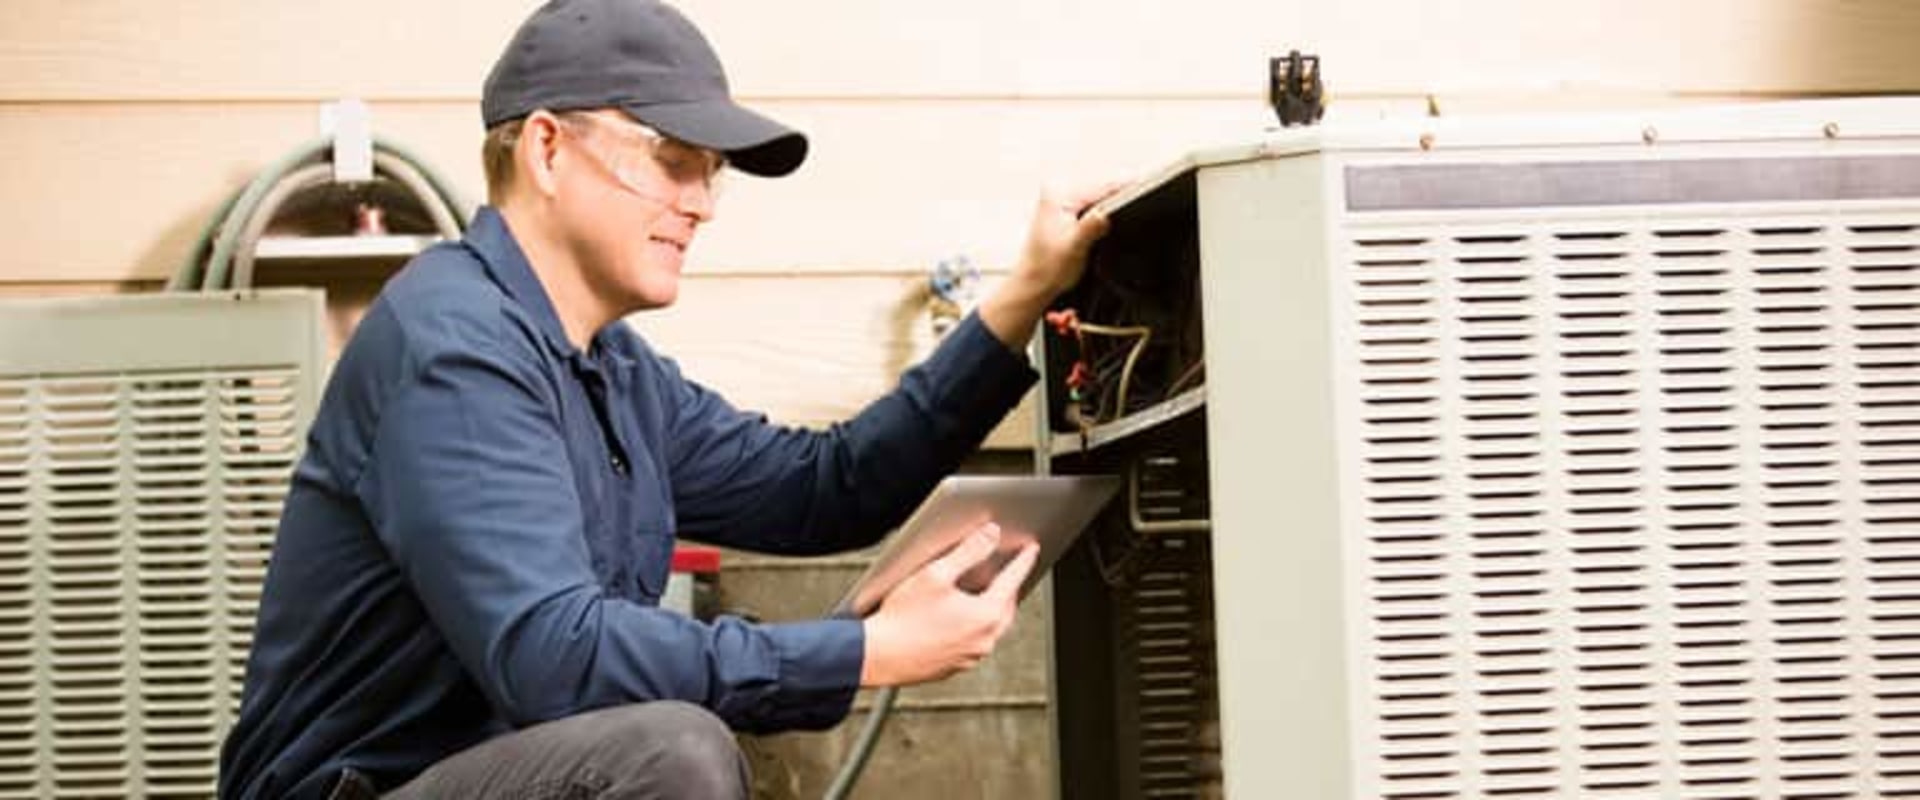 How Much Does HVAC Maintenance Cost?